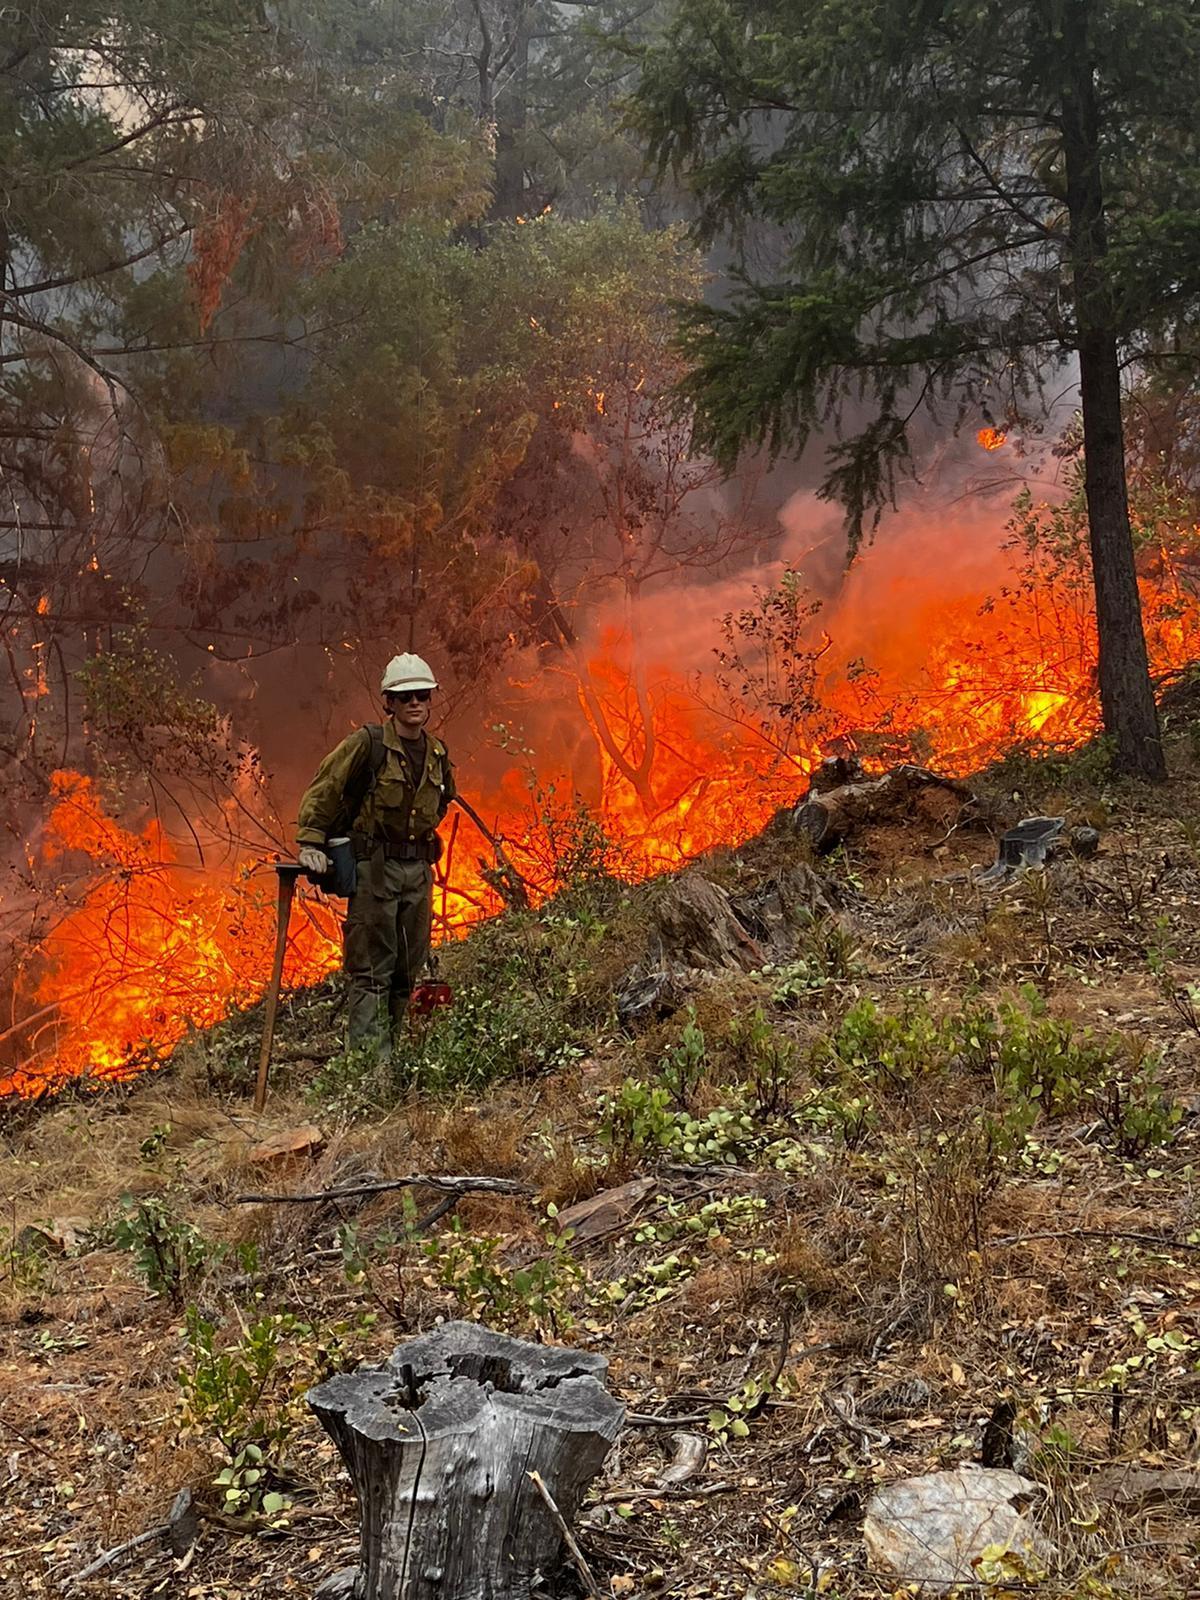 A lone male firefighter stands with his back to low-intensity flames of a firing operation, scanning vegetation on the unburned side of the fireline for spot fires, which he would then extinguish. The firing operation was conducted on Buckeye Ridge.